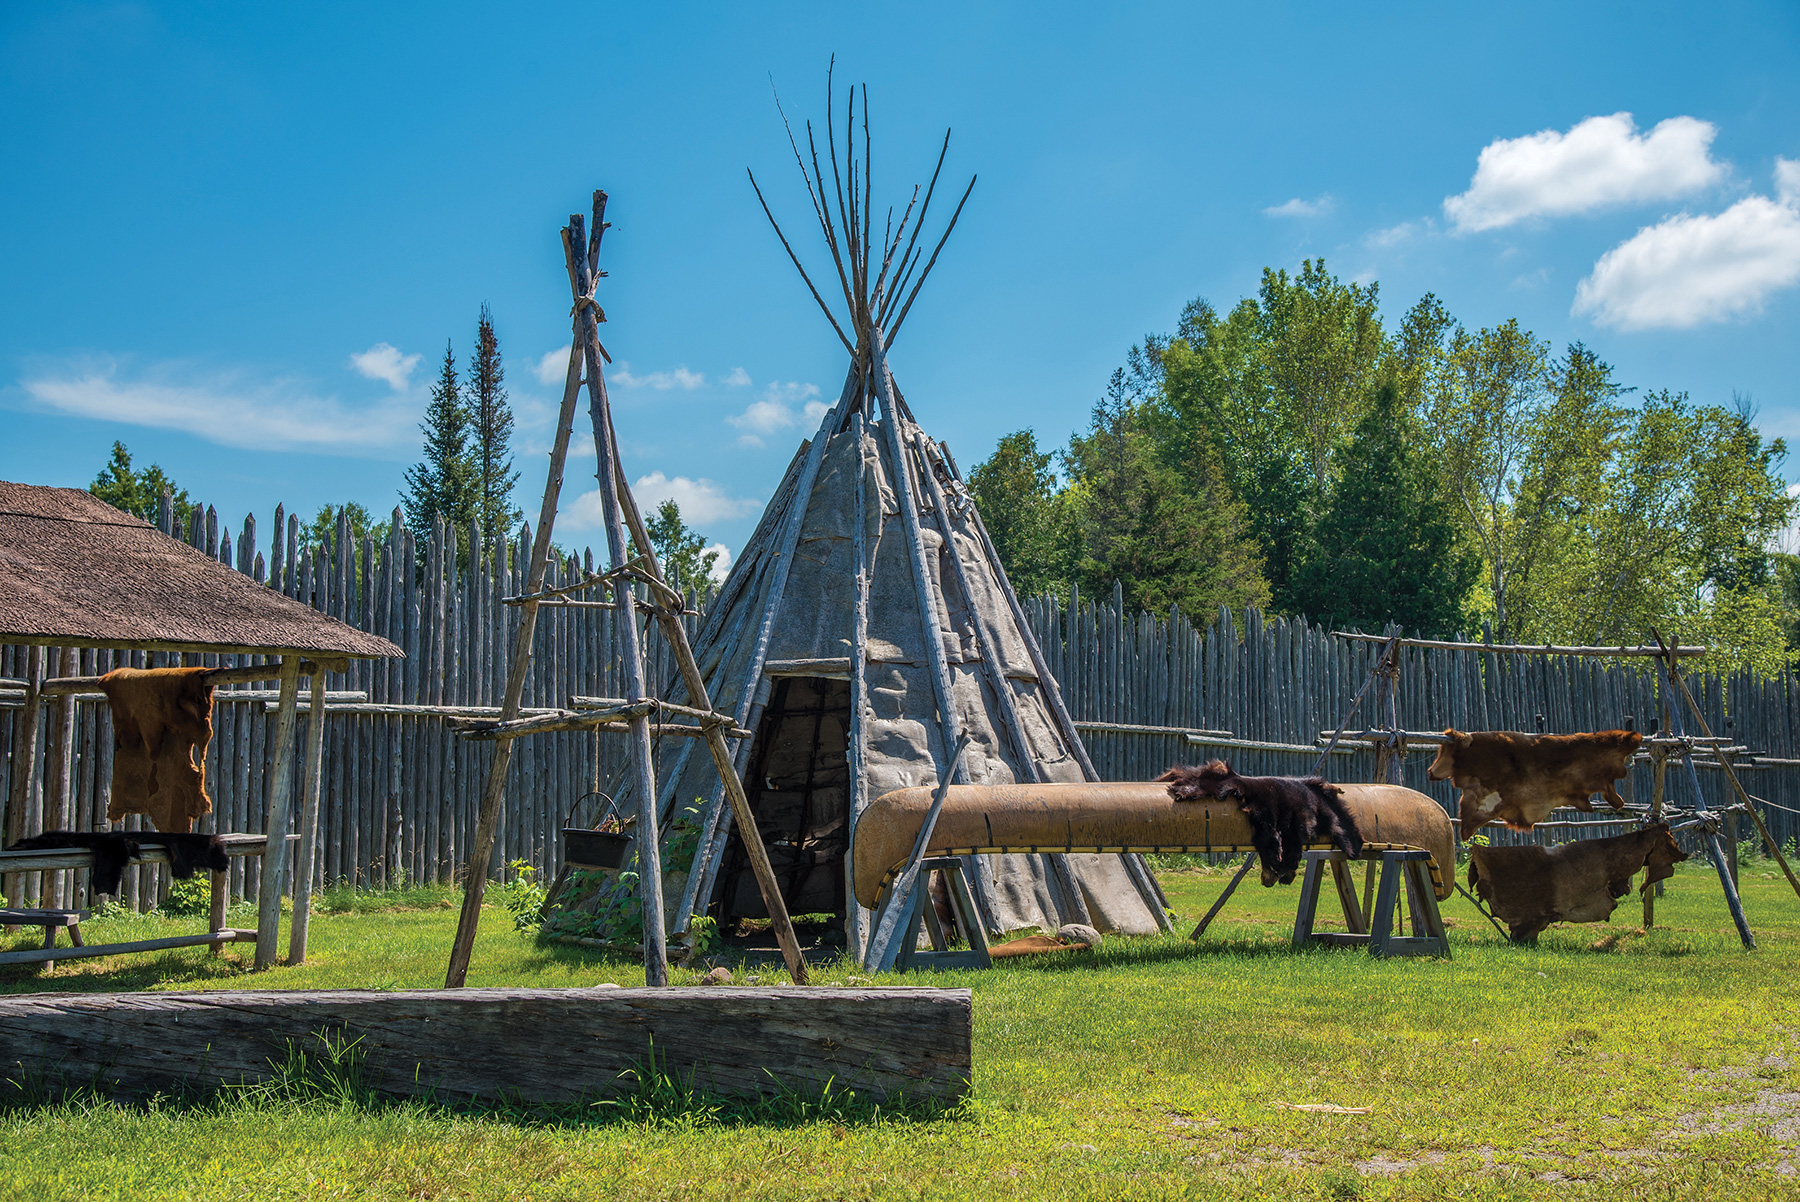 Sainte-Marie Among the Hurons near Midland is a world-renowned reconstruction of the French Jesuit mission to the Wendat People, built in 1639.